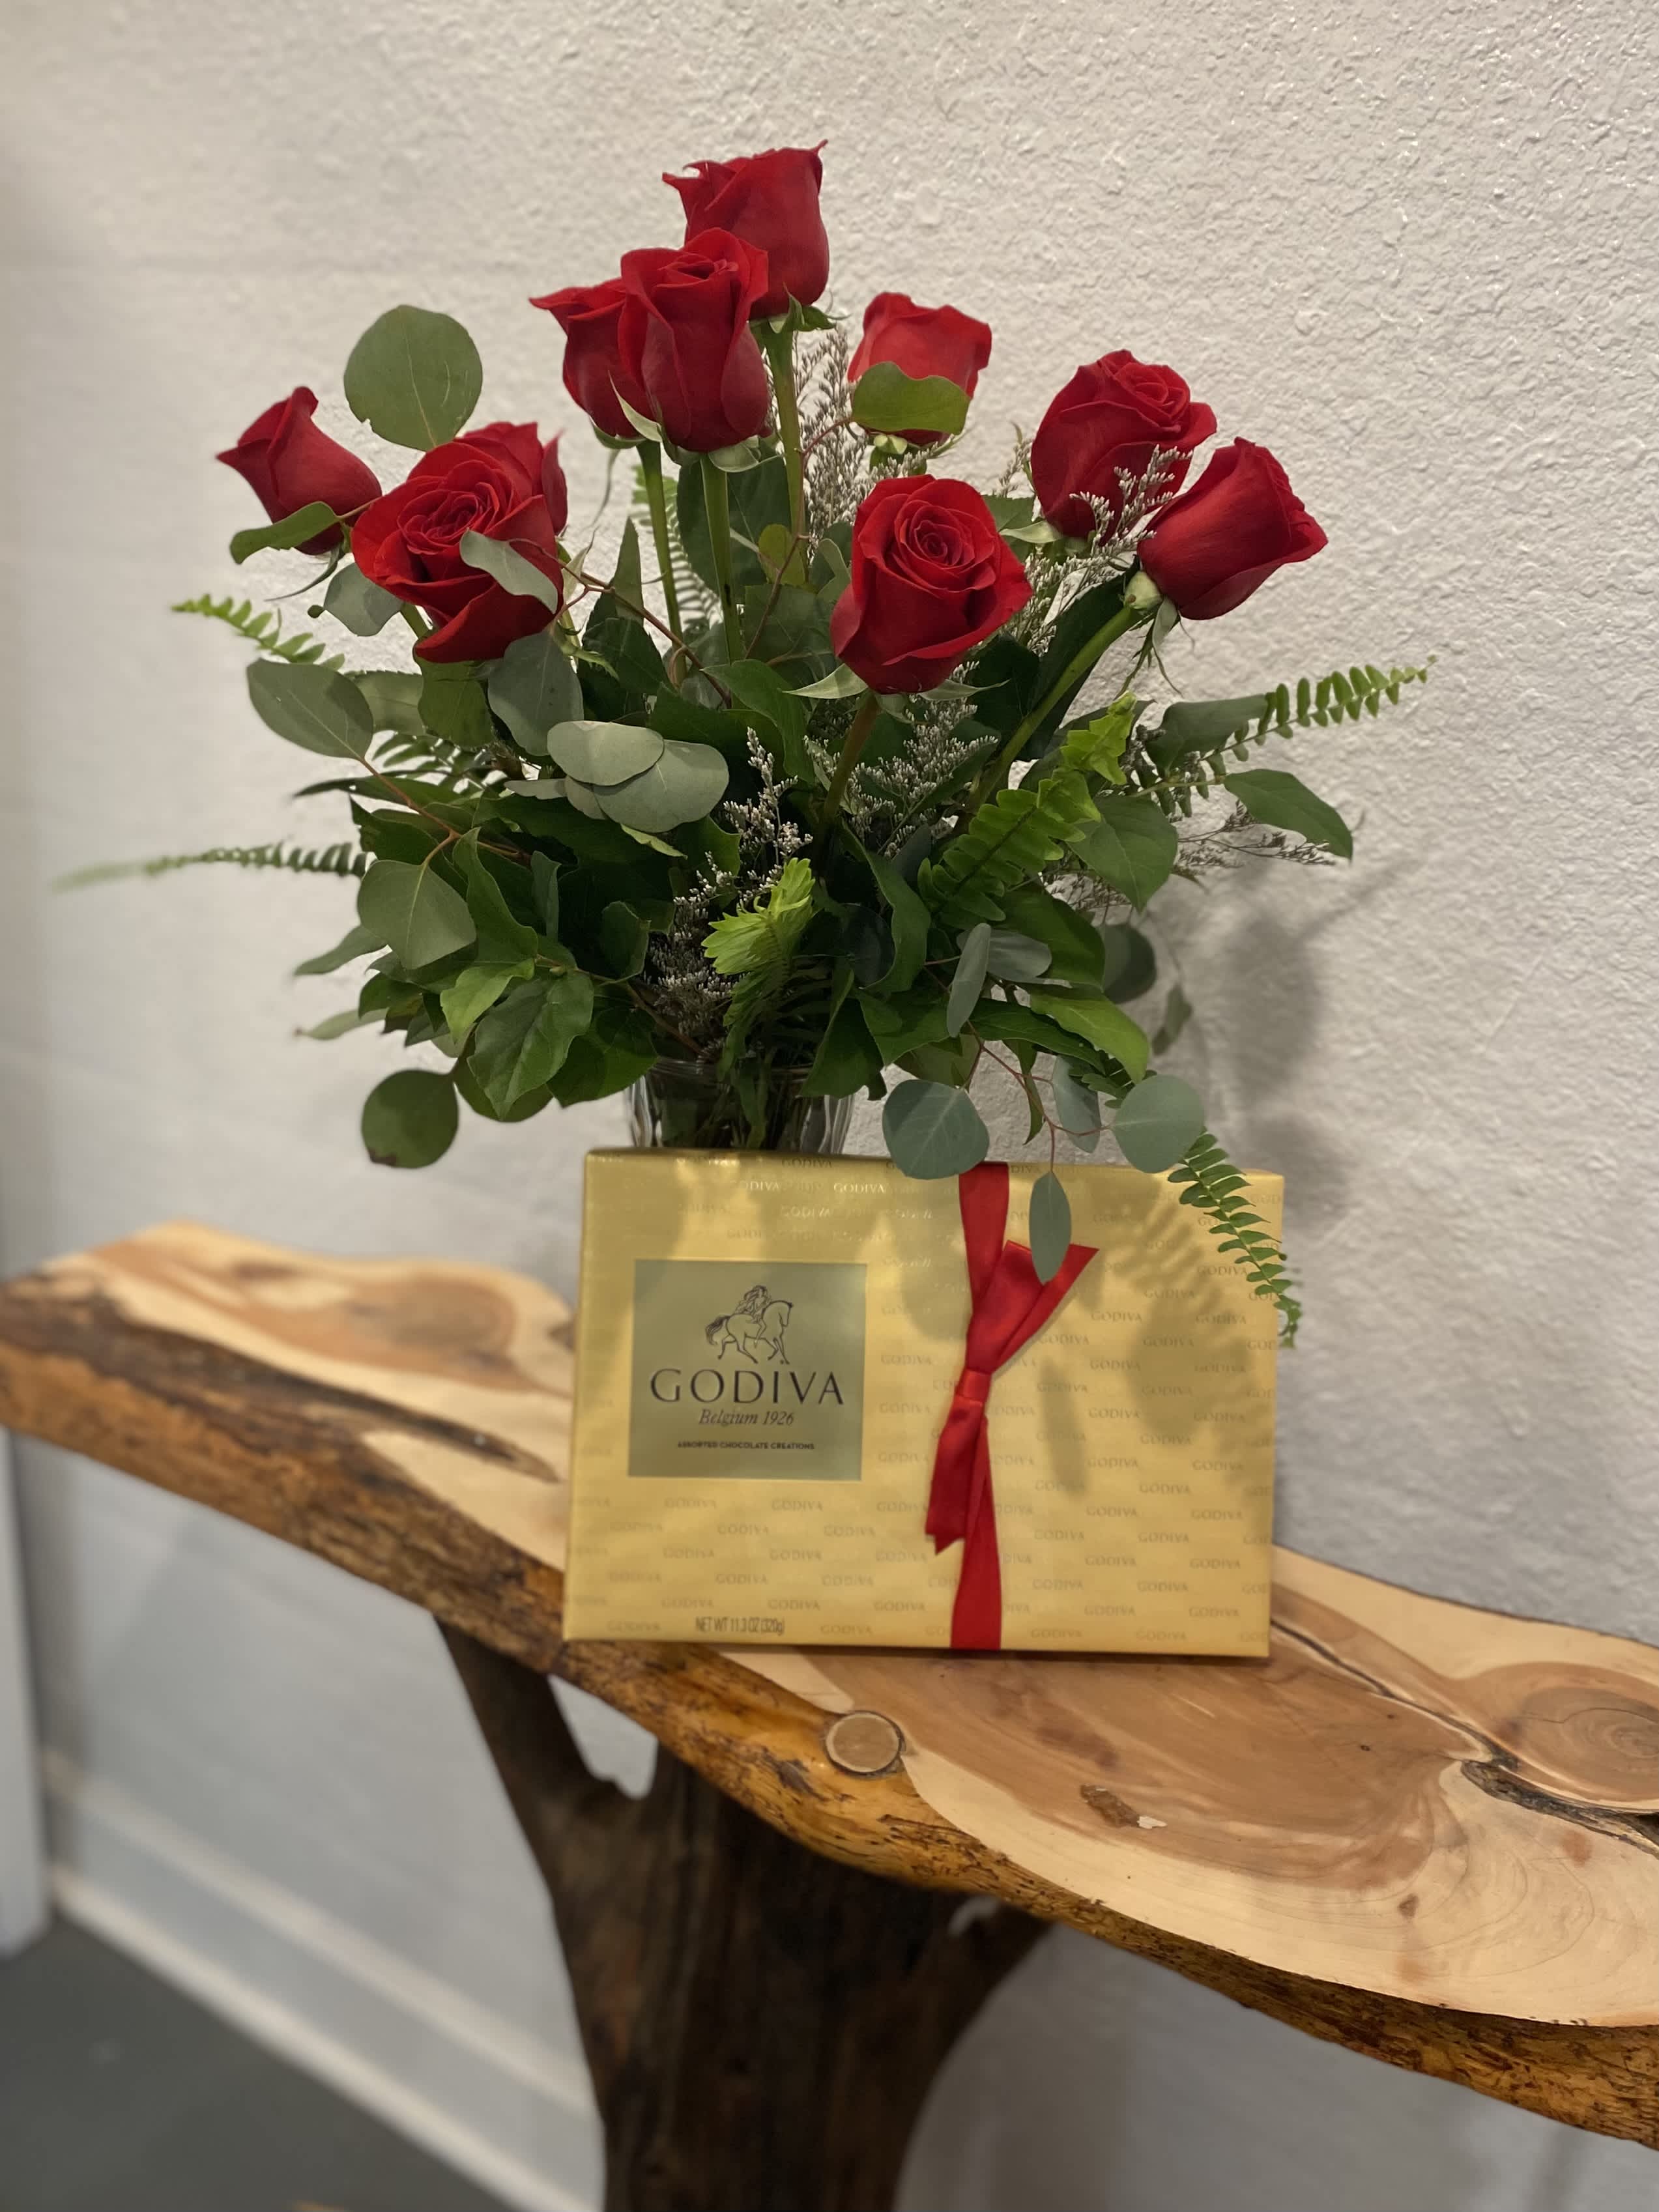 Dozen Red Roses and Box of Godiva Chocolate  - These beautiful red roses and box of Godiva Chocolates are the perfect treat for any occasion!